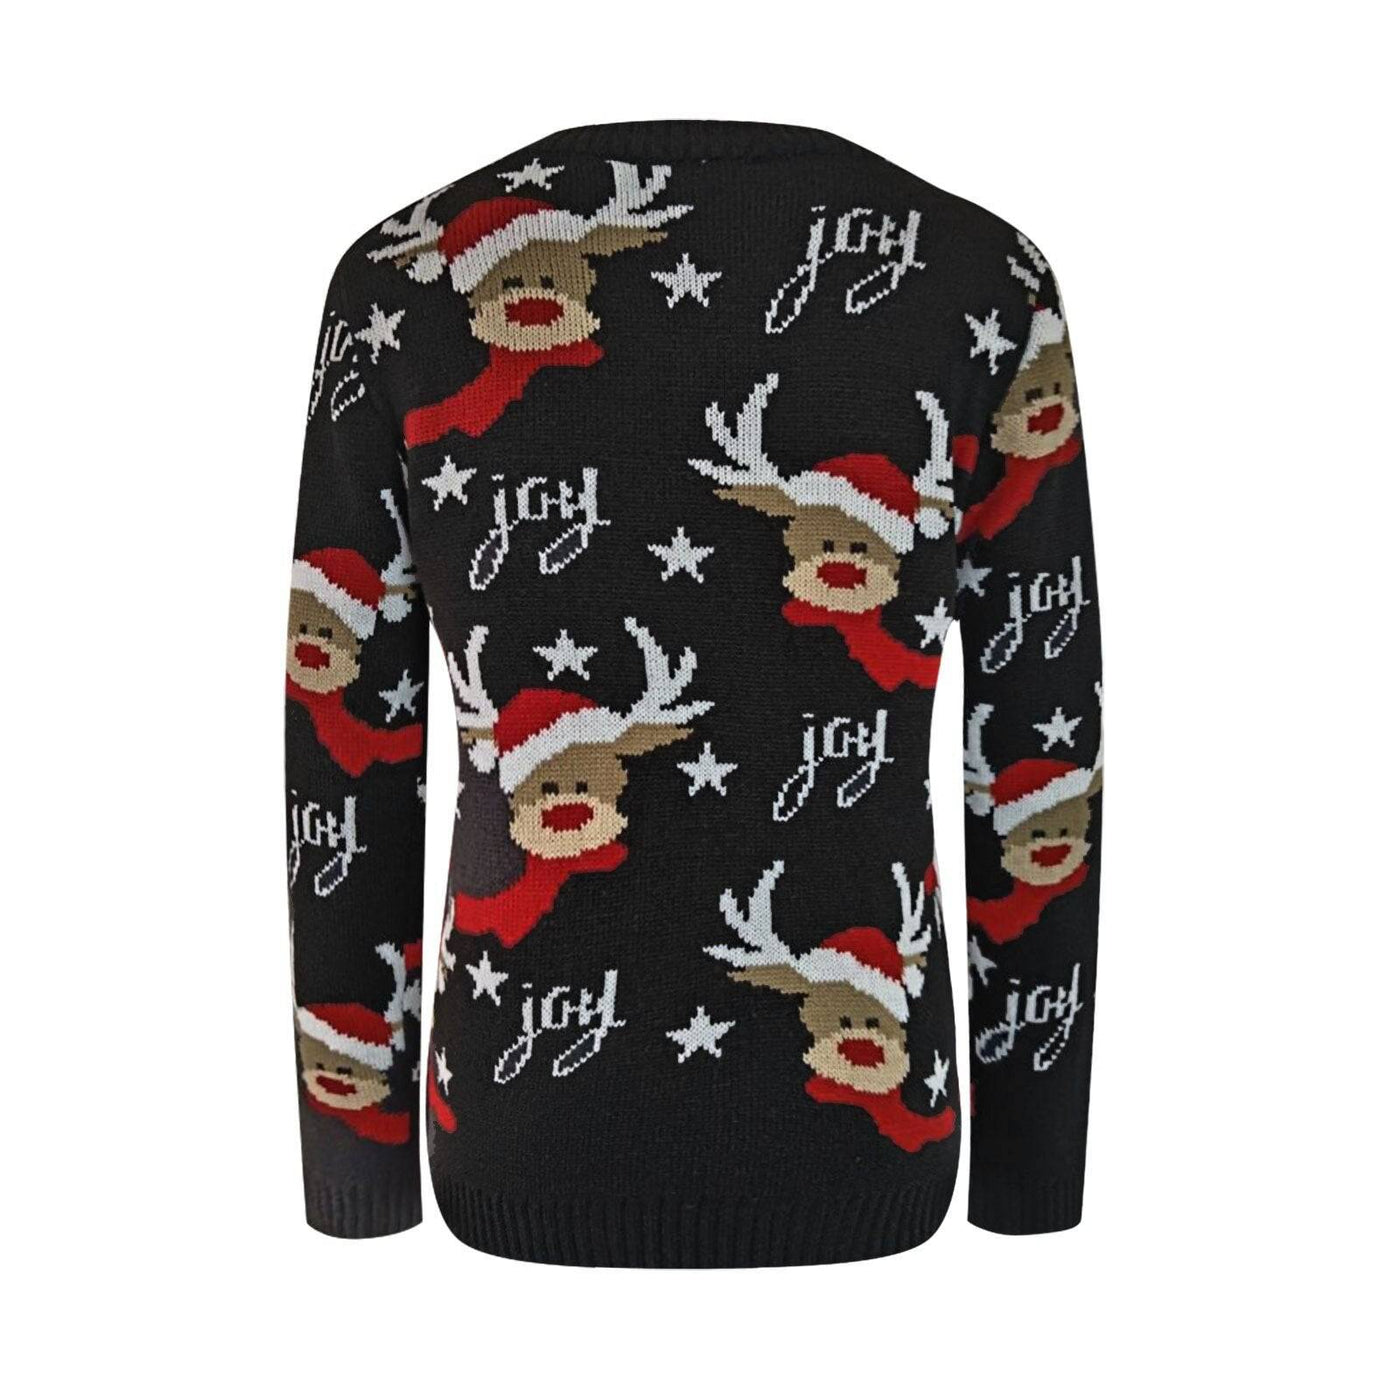 Reign Joy and Reindeer Design Knitted Sweater - Hot fashionista